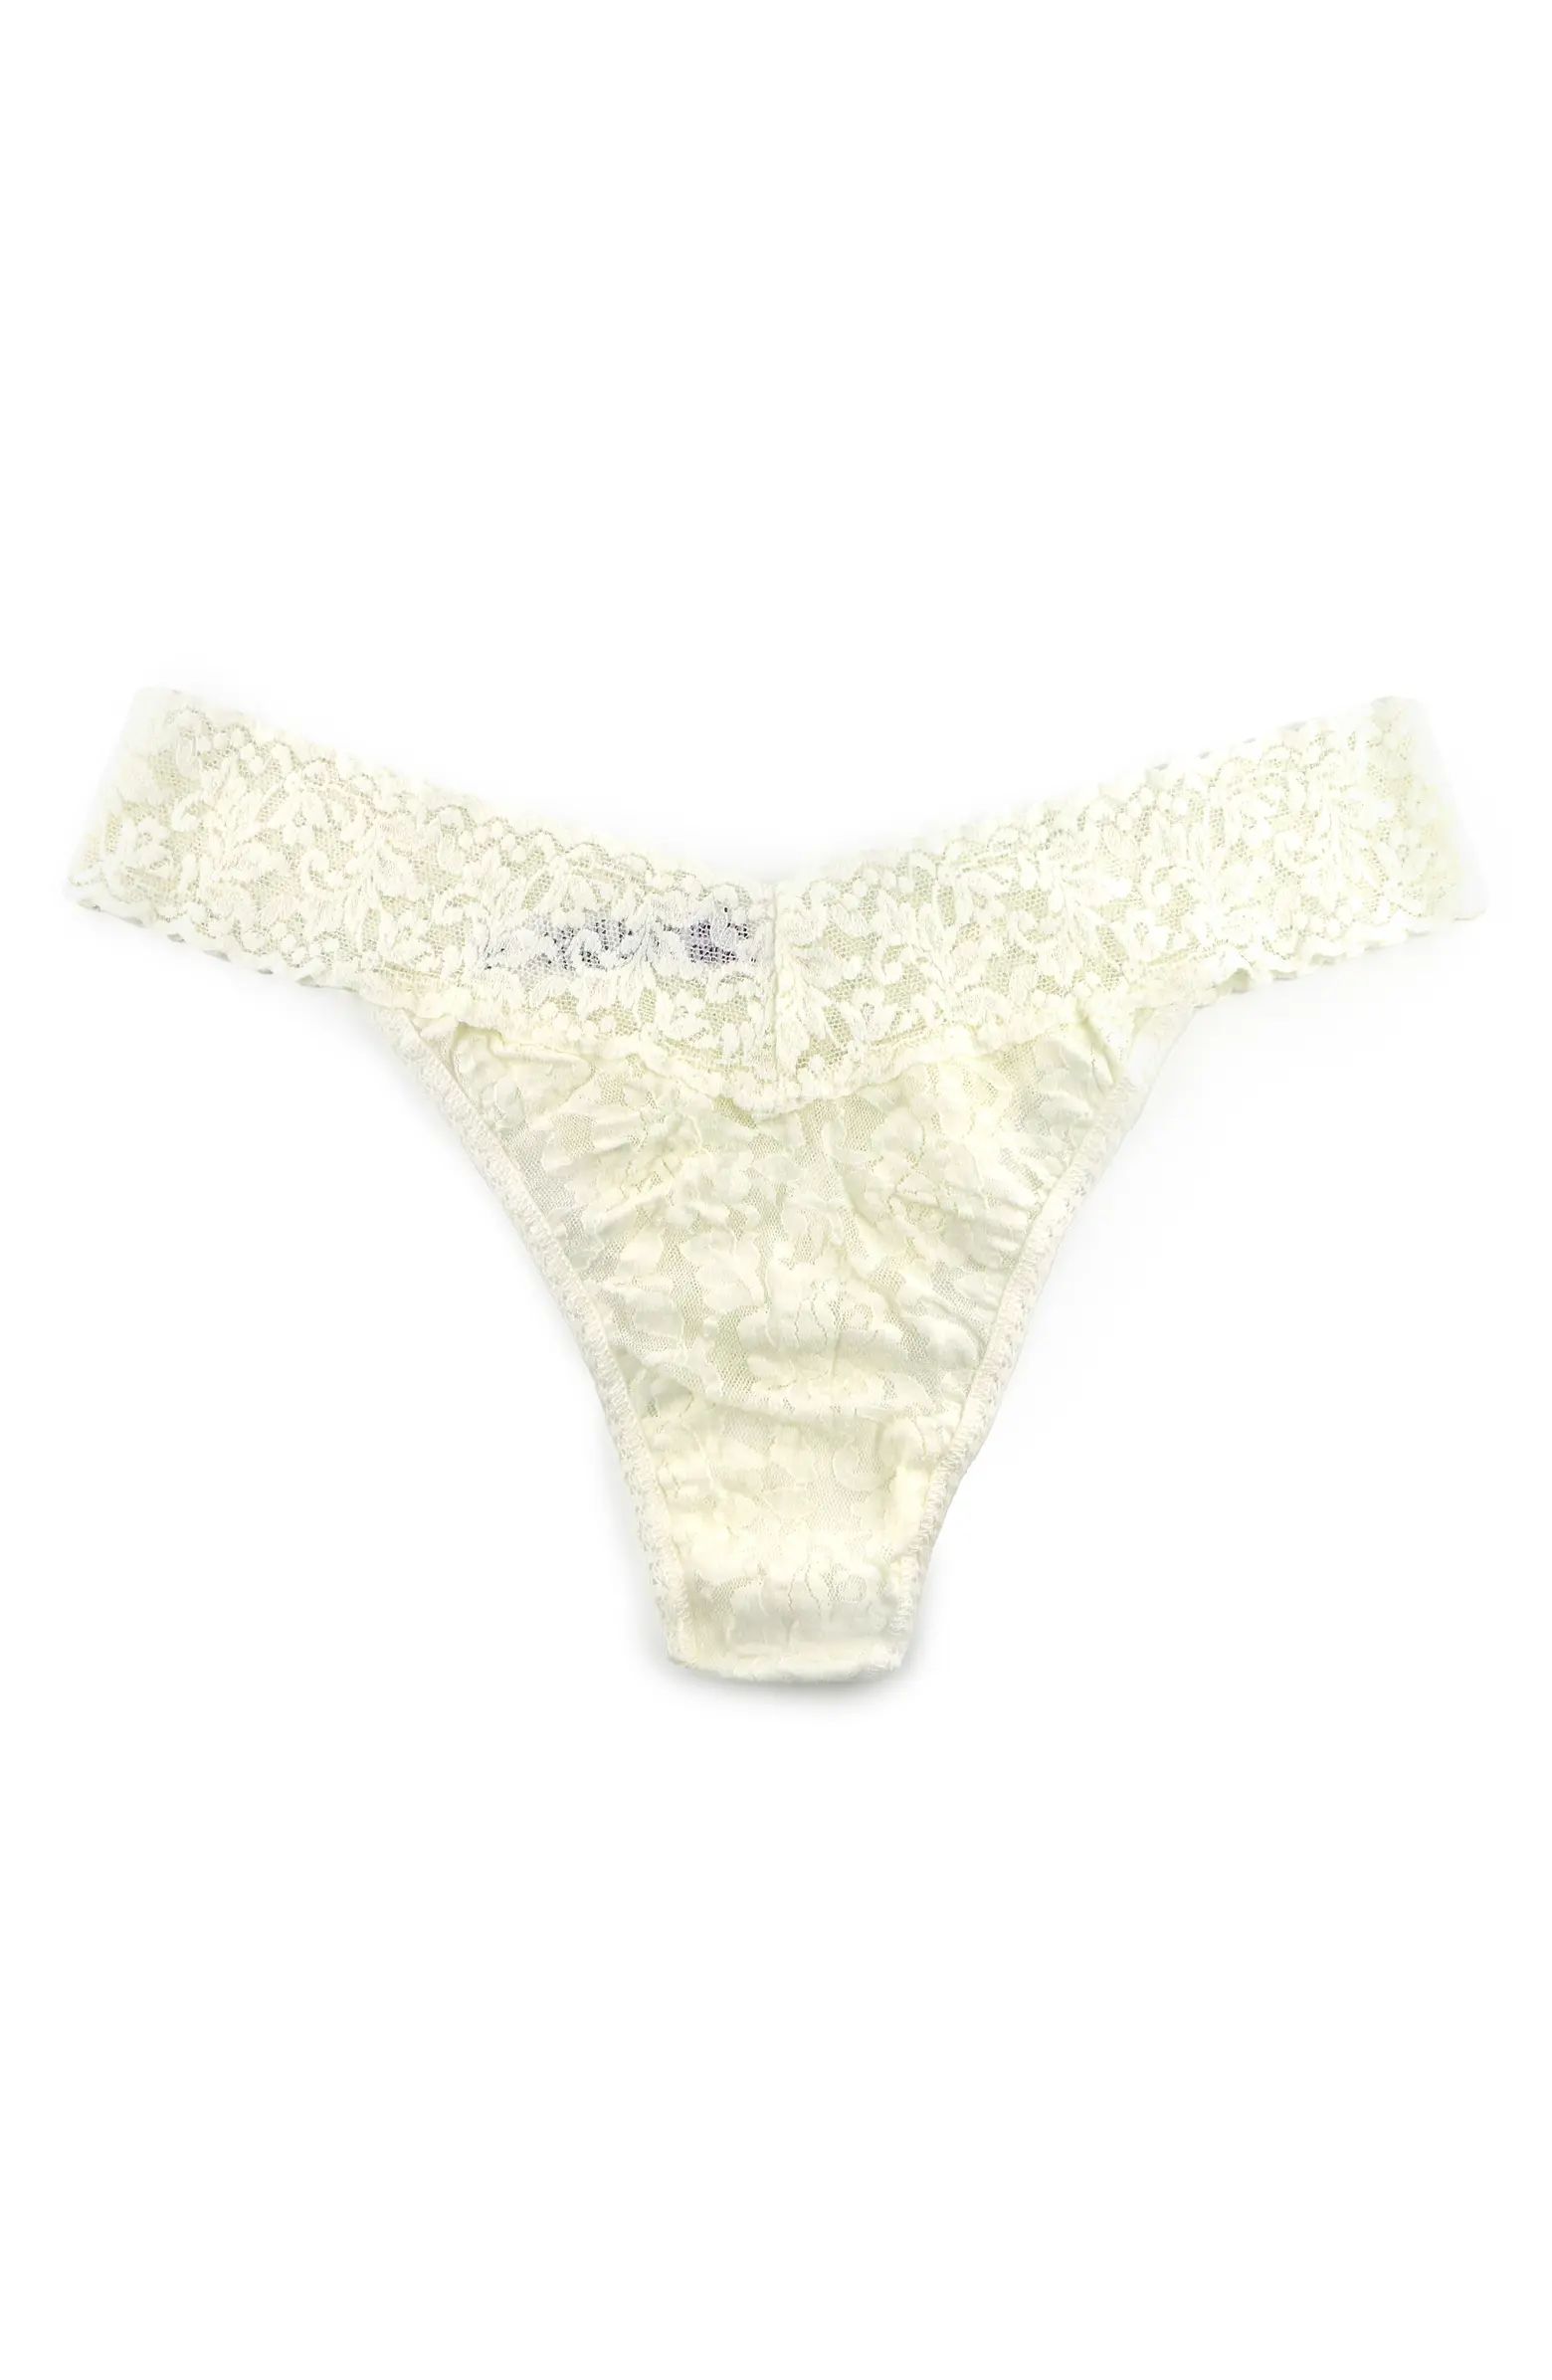 Original Rise Lace Thong | Nordstrom